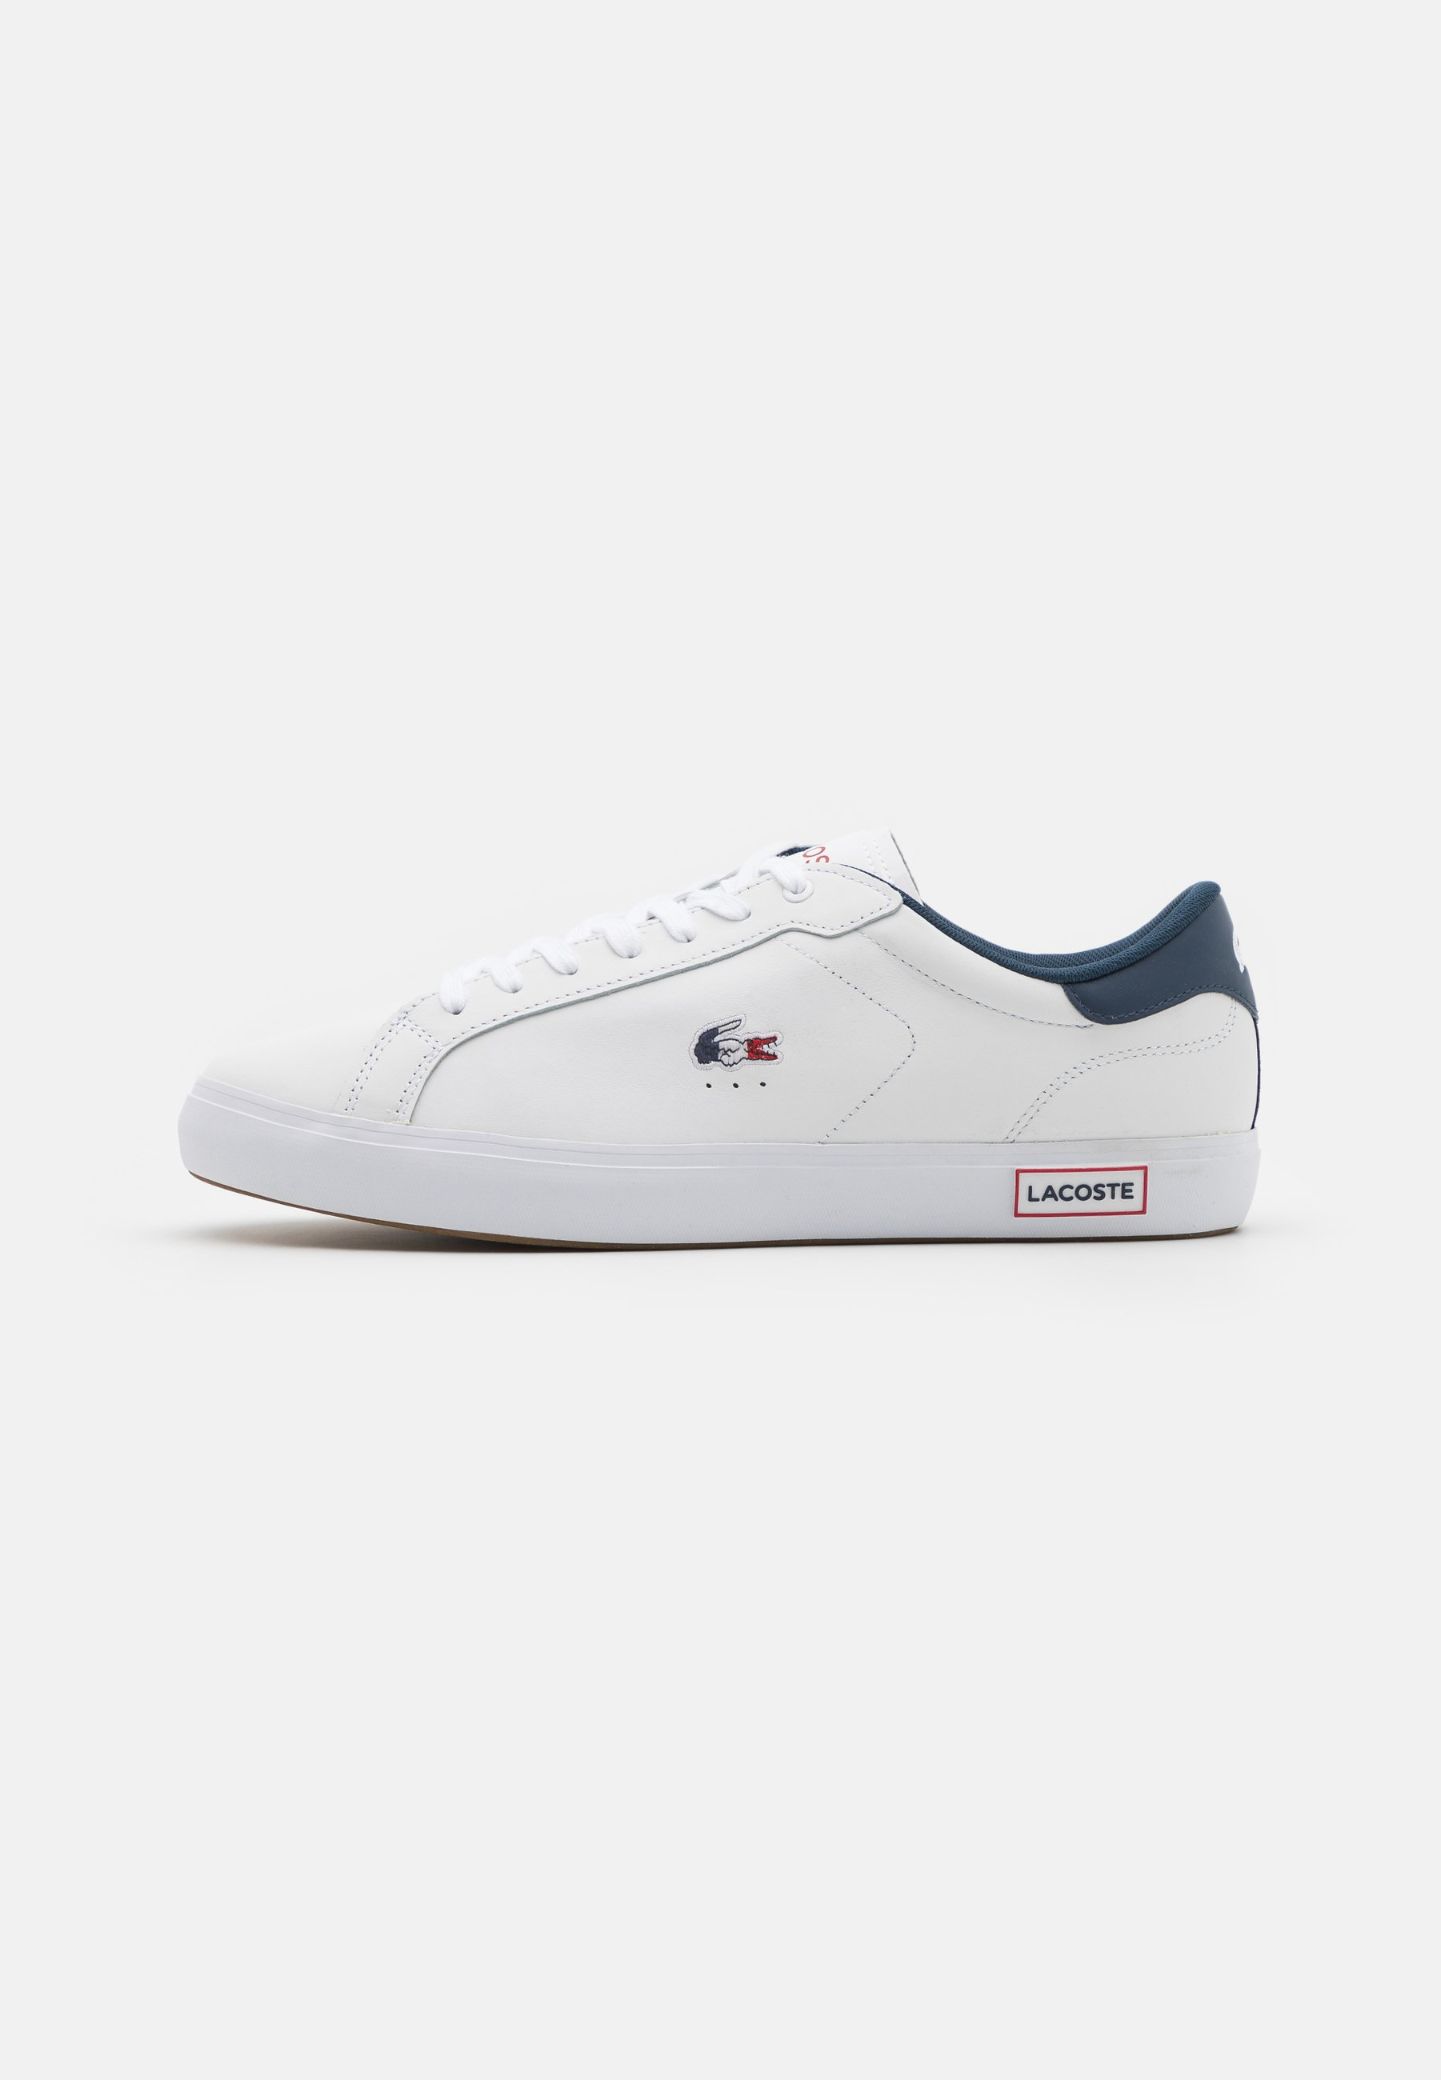 DEPORTIVO MENS LACOSTE POWERCOURT LEATHER TRICOLOR SNEAKERS WHITE / NAVY / RED